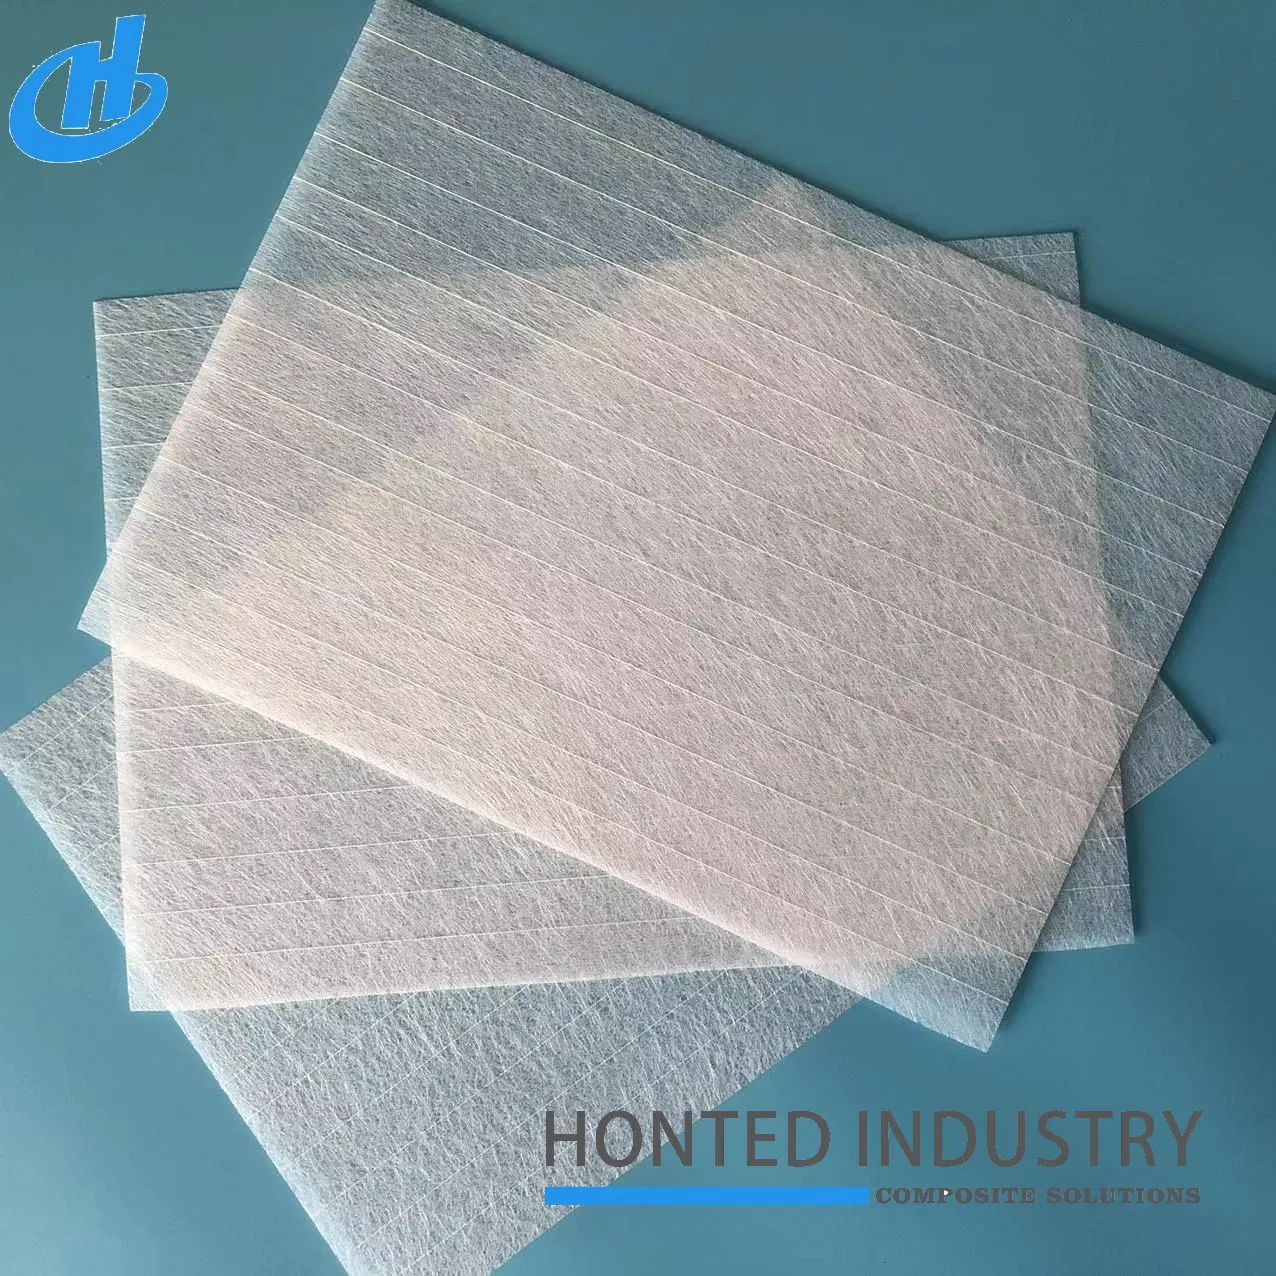 30g- 100g Fiberglass Surface Tissue / Roofing Tissue for FRP Products / Thermal Insulation, Fire Retardant, Epoxy Coated Sheet